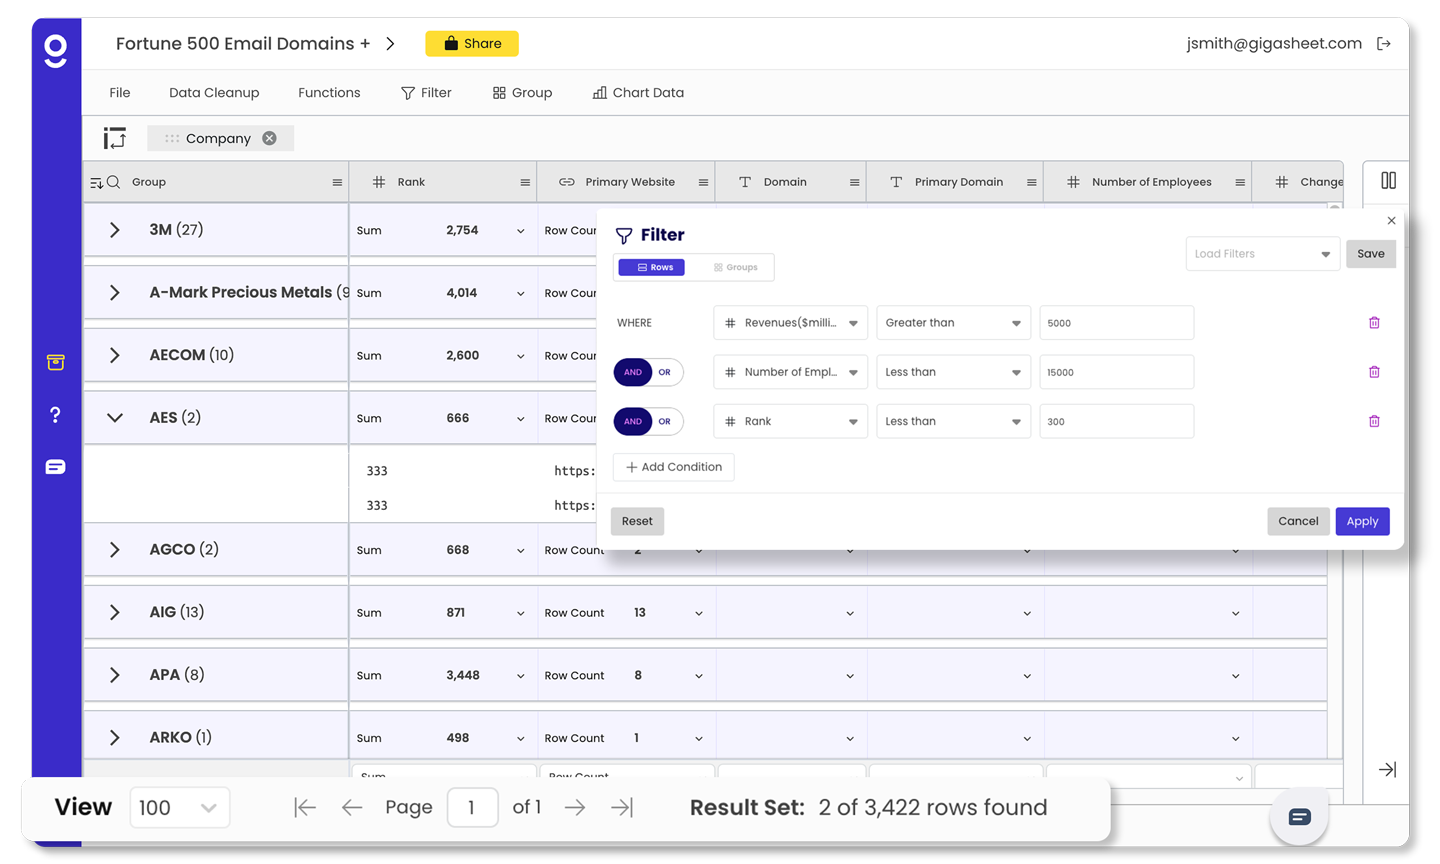 Gigasheet's interface allows users to quickly find insights by segmenting and filtering large datasets